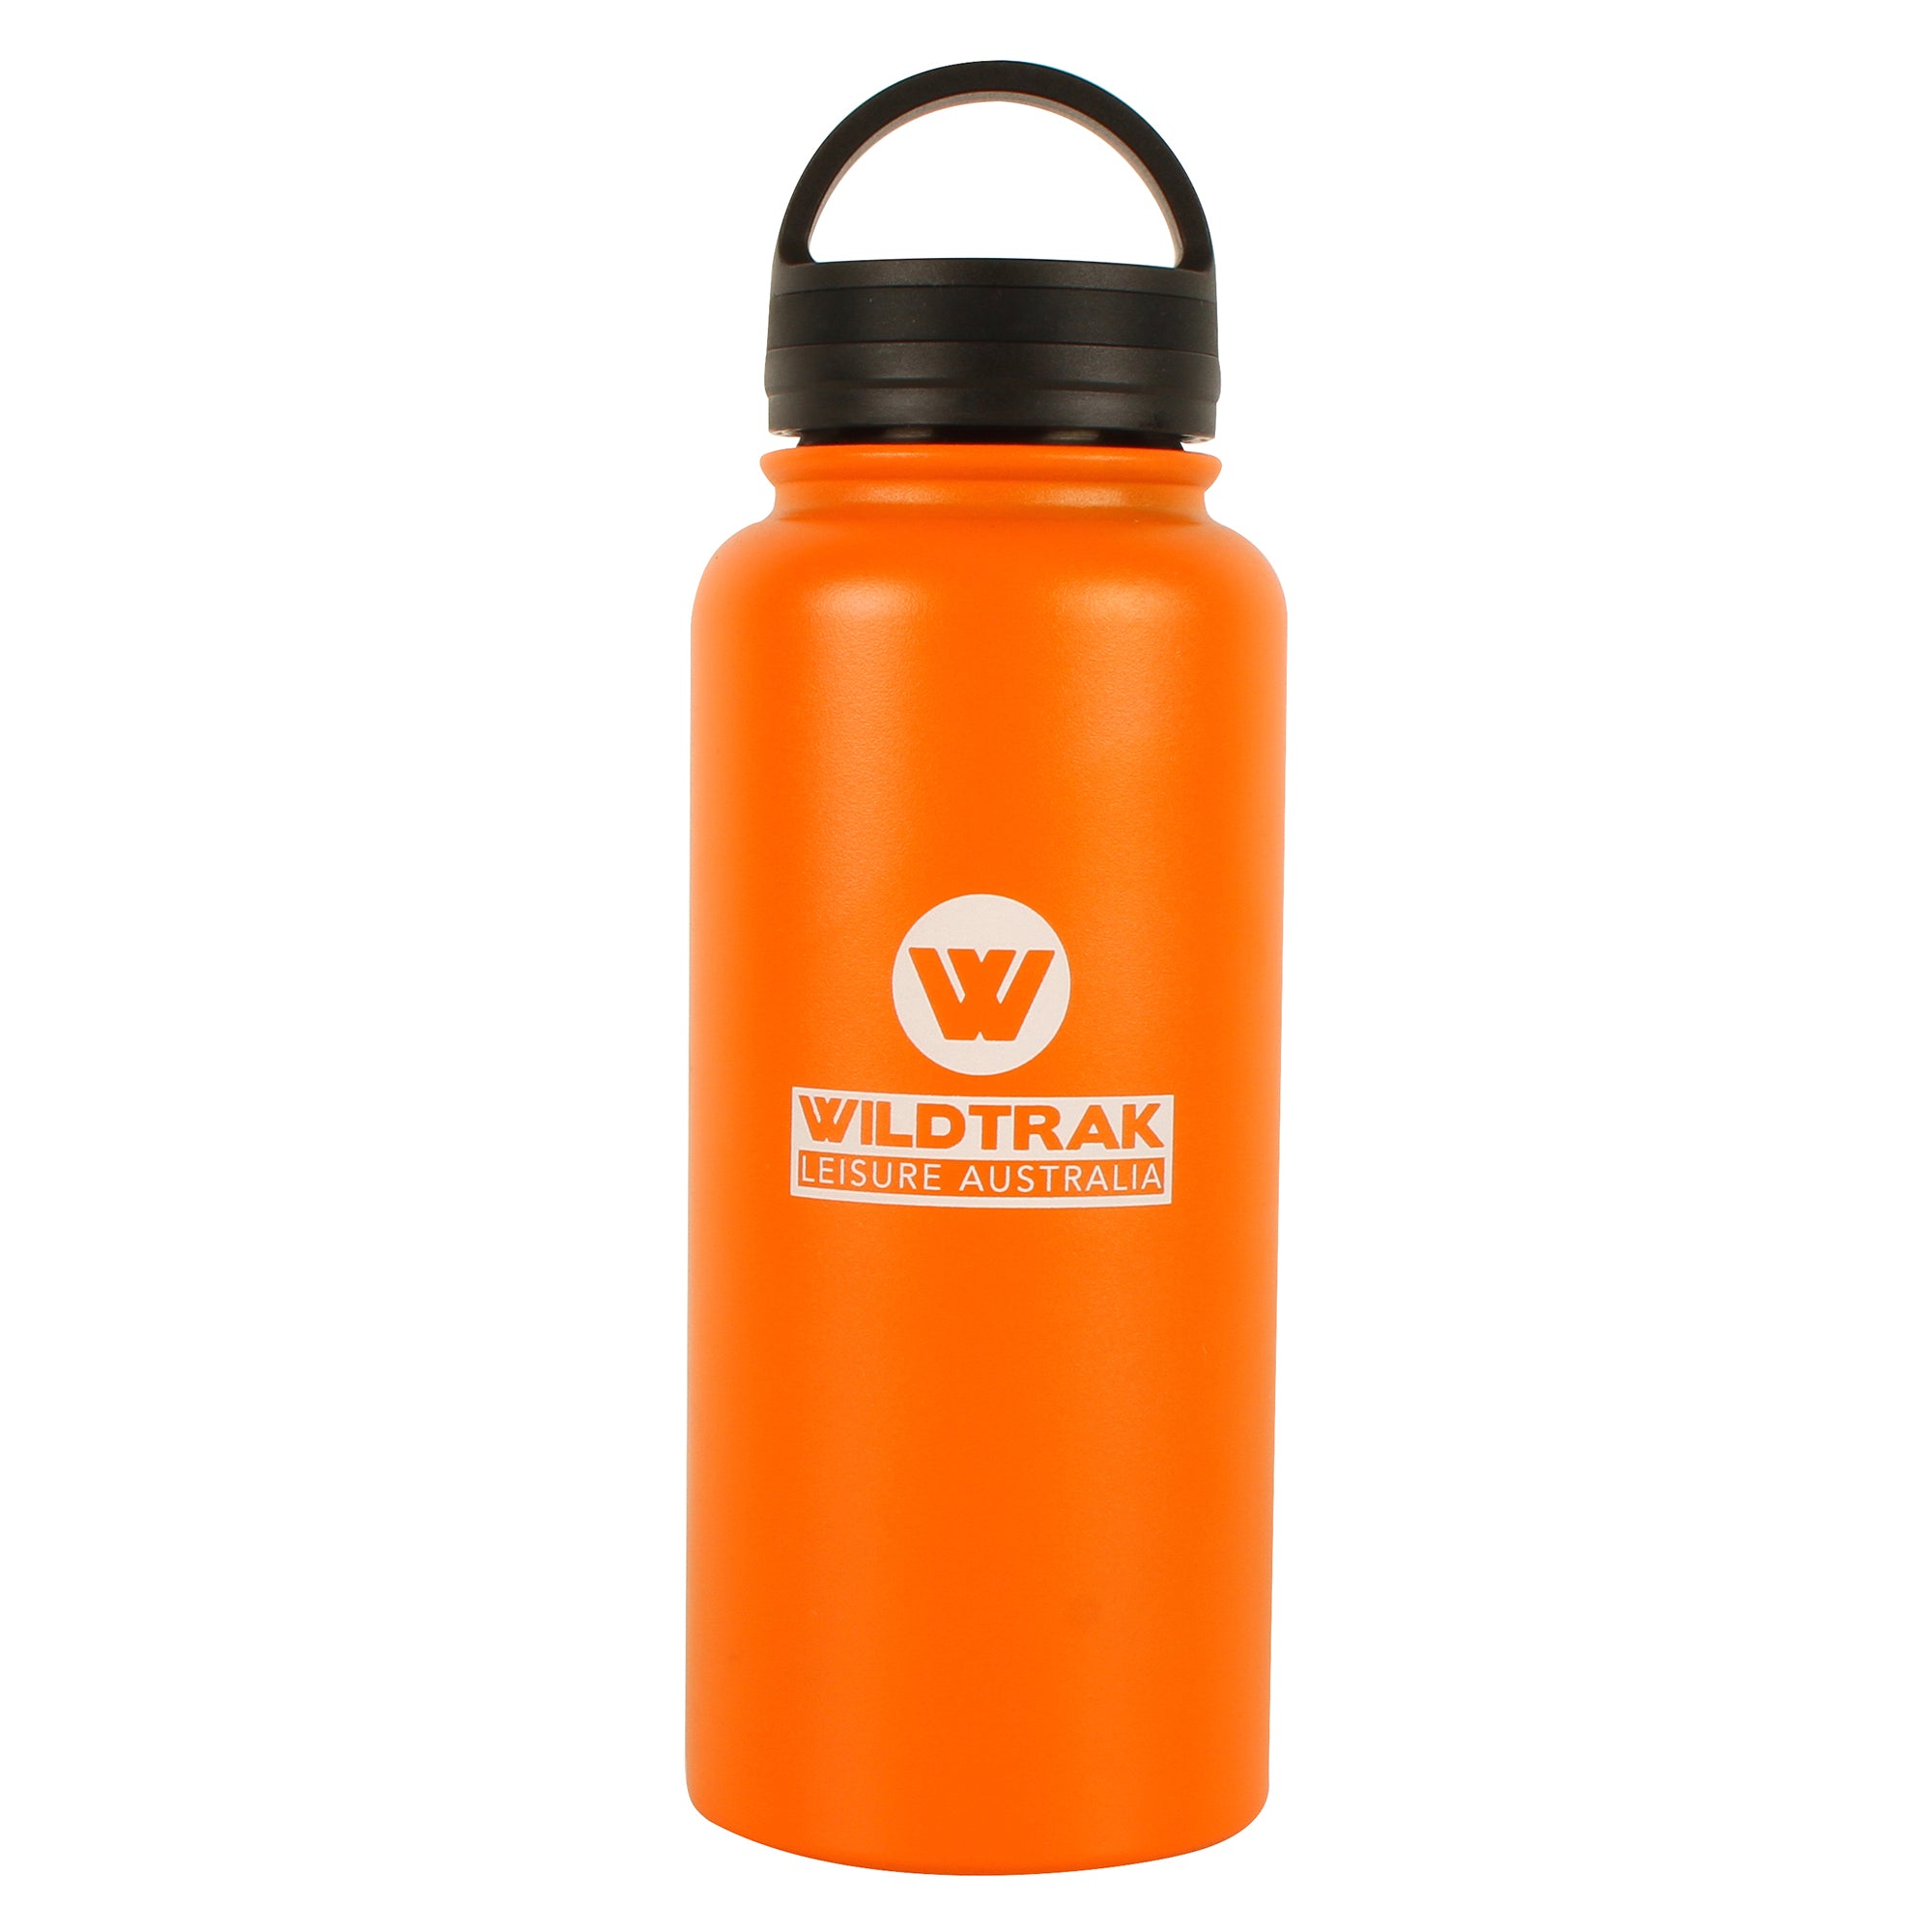 1 LITRE INSULATED VACUUMM TRAVEL FLASK